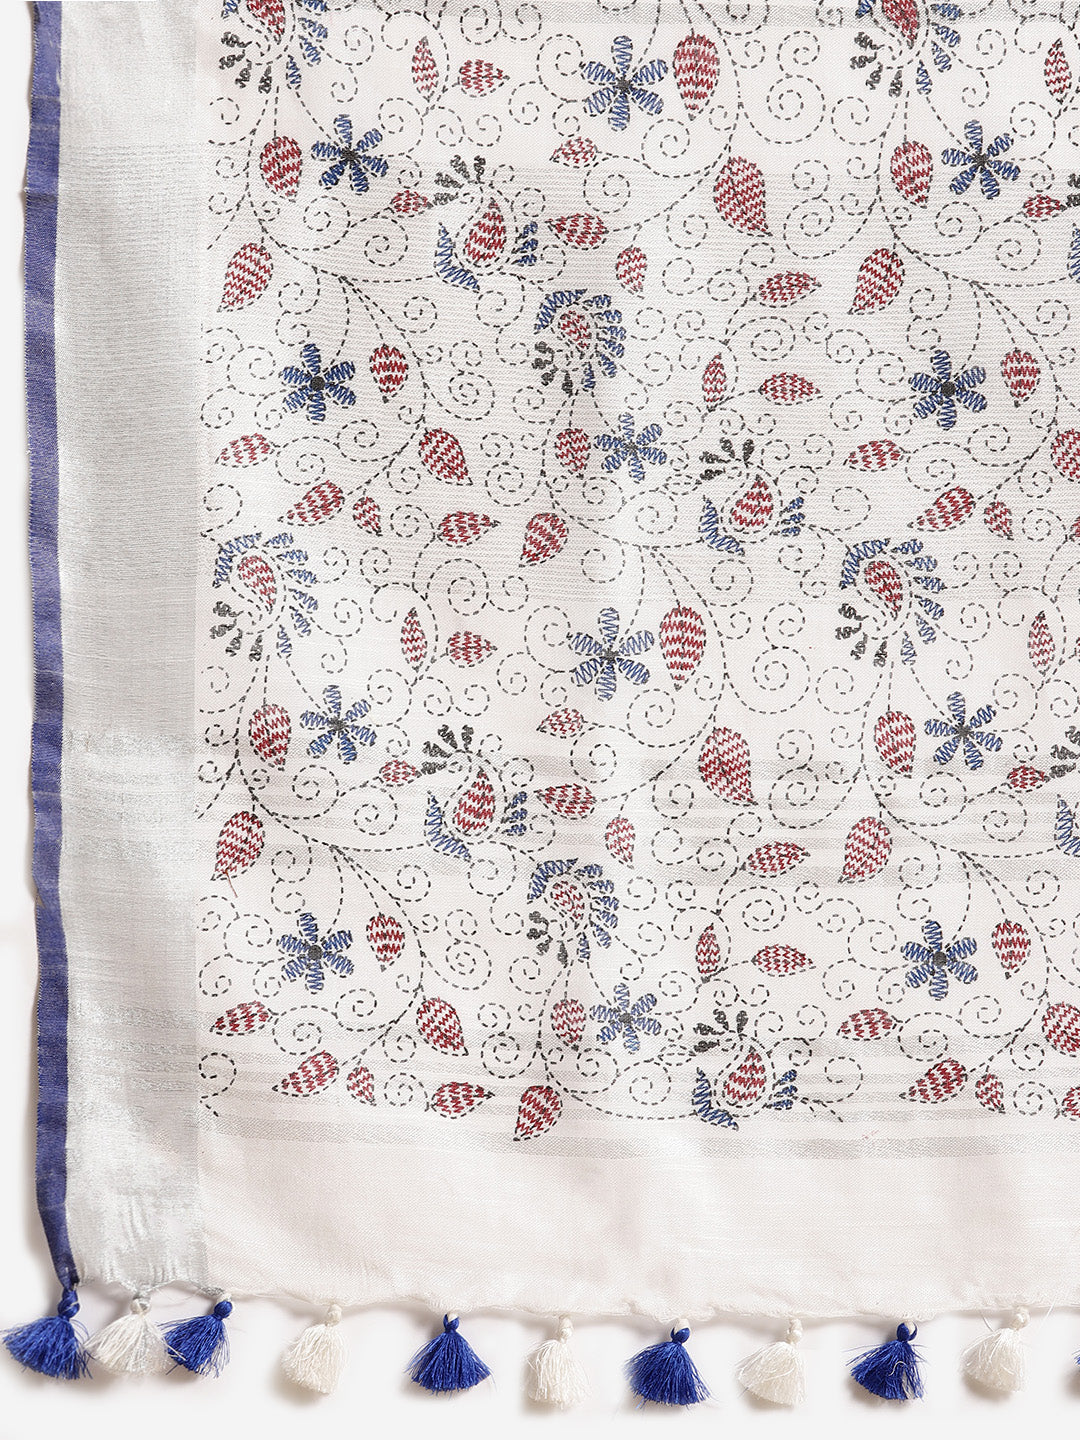 White and Blue, Kalakari India Bhagalpuri Linen Blend Woven Design Saree with Blouse ALBGSA0137-Saree-Kalakari India-ALBGSA0137-Cotton, Geographical Indication, Hand Crafted, Heritage Prints, Linen, Natural Dyes, Red, Sarees, Shibori, Sustainable Fabrics, Woven, Yellow-[Linen,Ethnic,wear,Fashionista,Handloom,Handicraft,Indigo,blockprint,block,print,Cotton,Chanderi,Blue, latest,classy,party,bollywood,trendy,summer,style,traditional,formal,elegant,unique,style,hand,block,print, dabu,booti,gift,pre